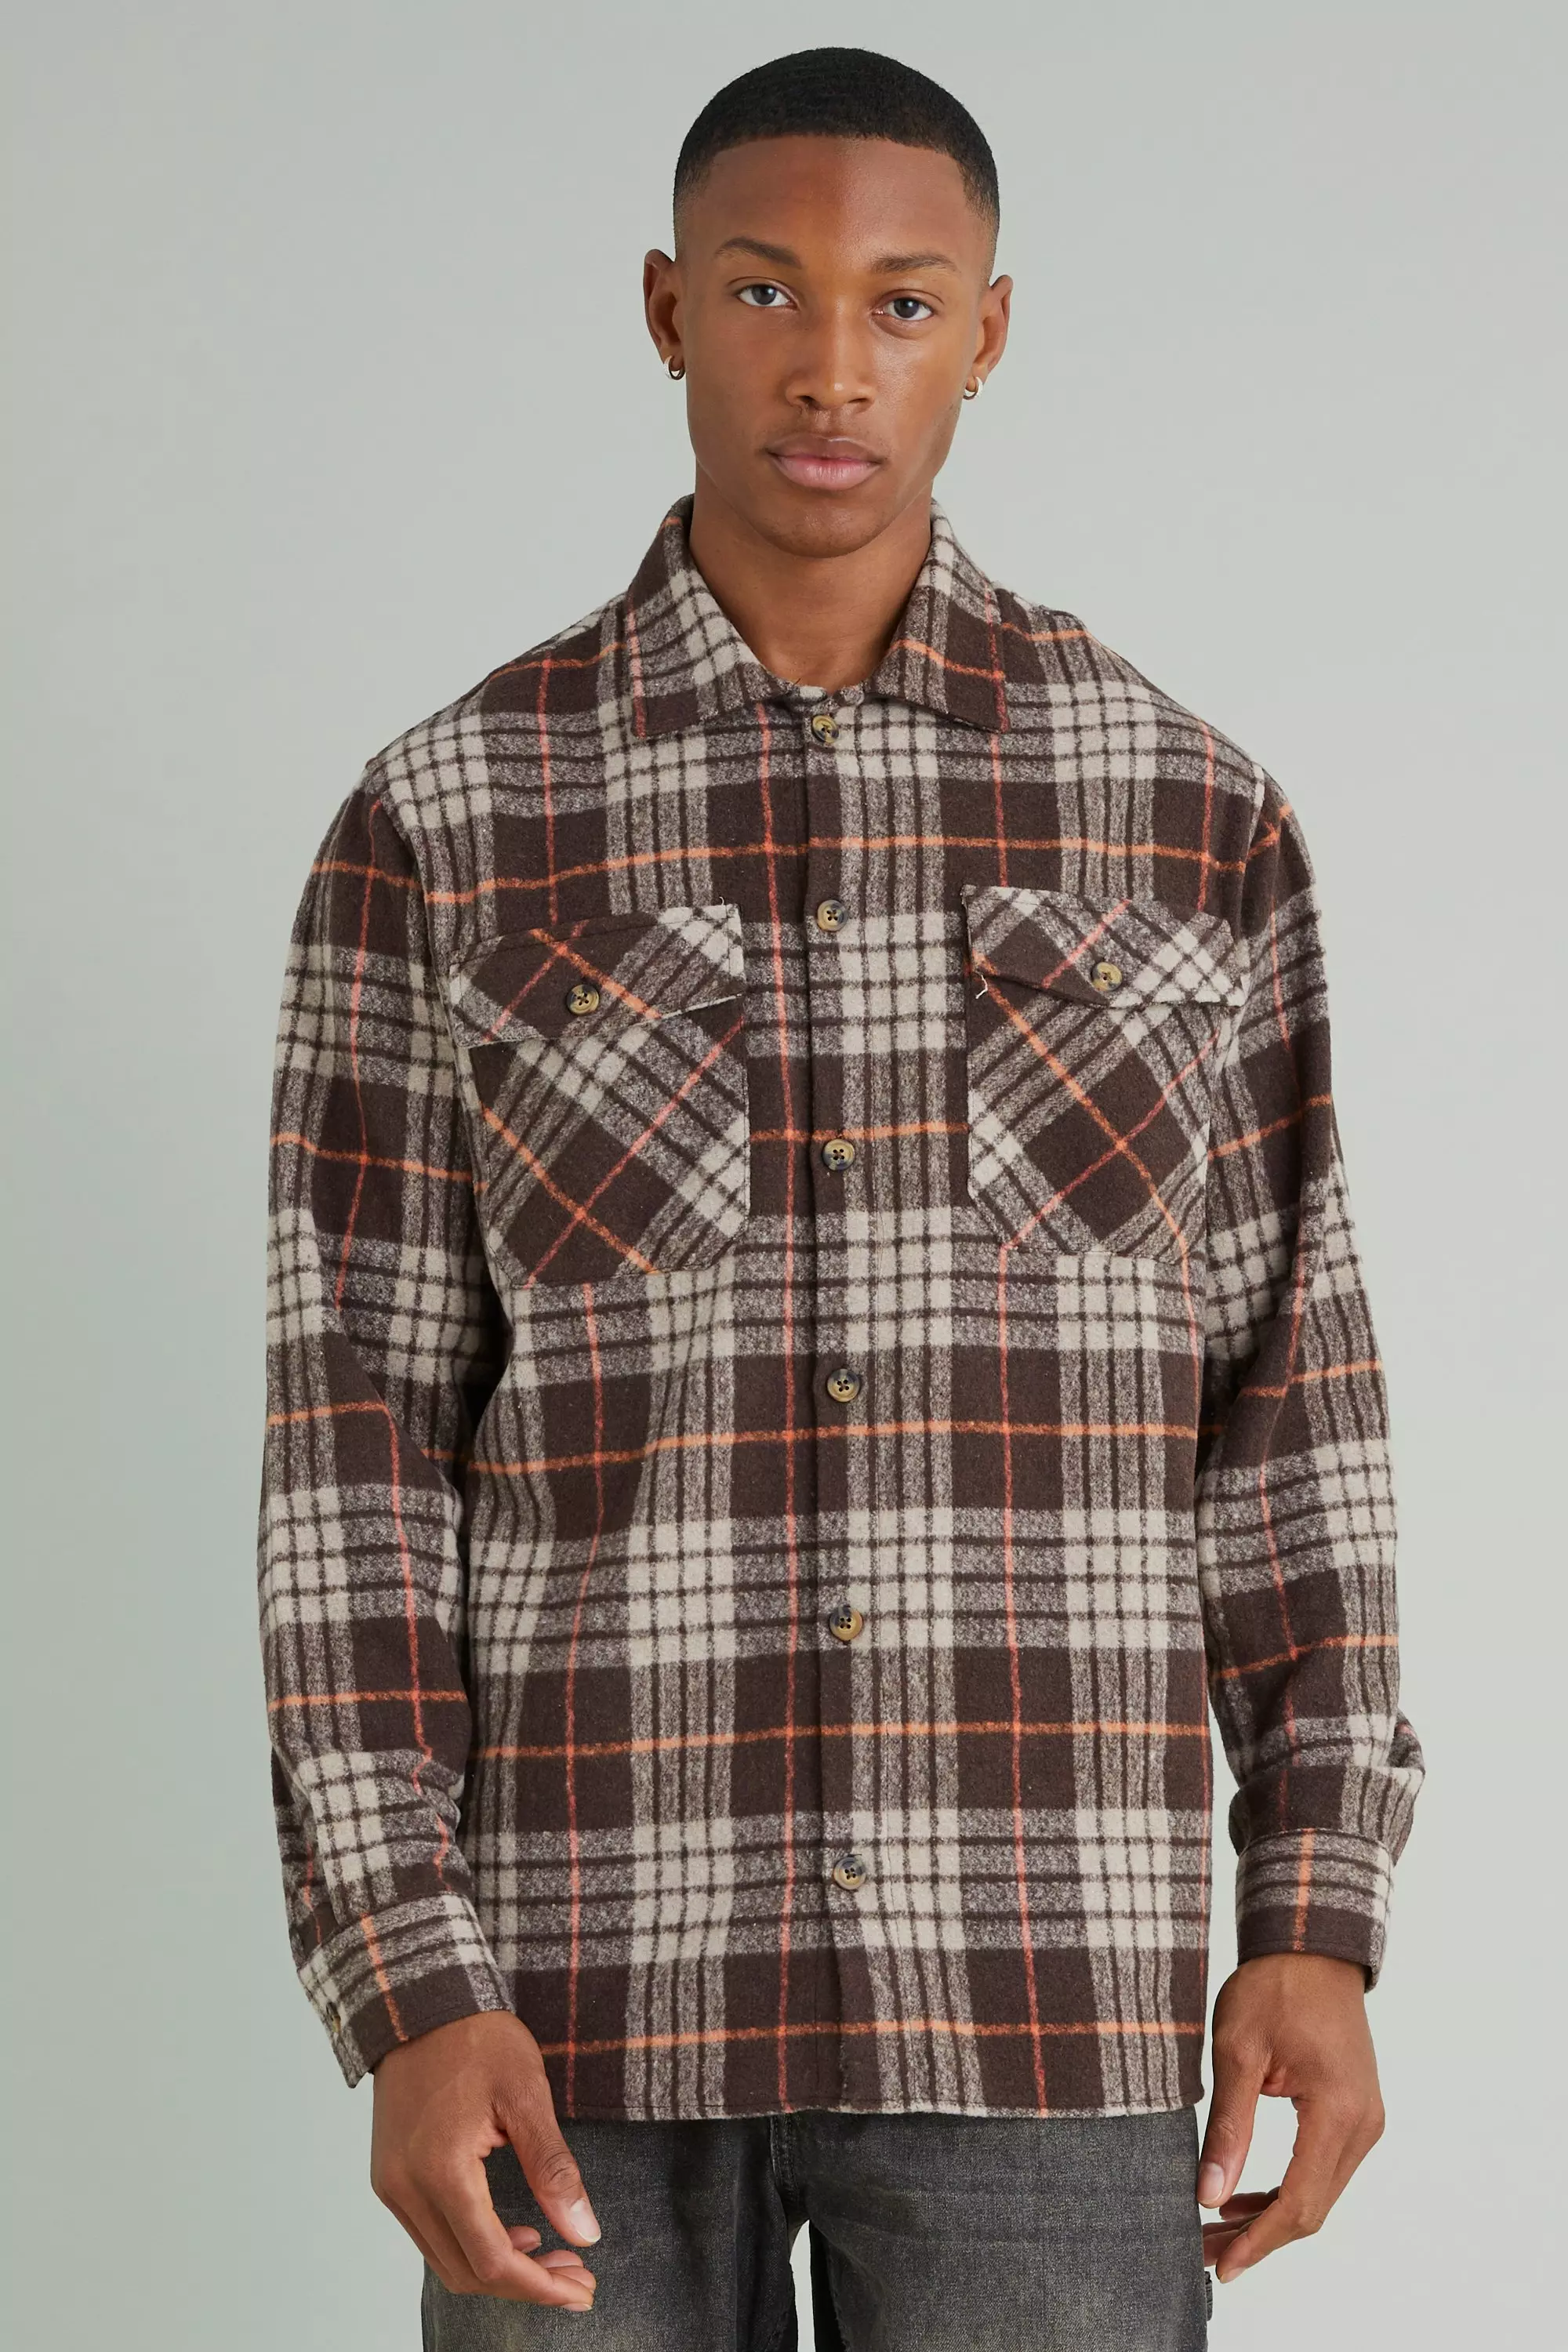 Long Sleeve Brushed Flannel Shirt Chocolate